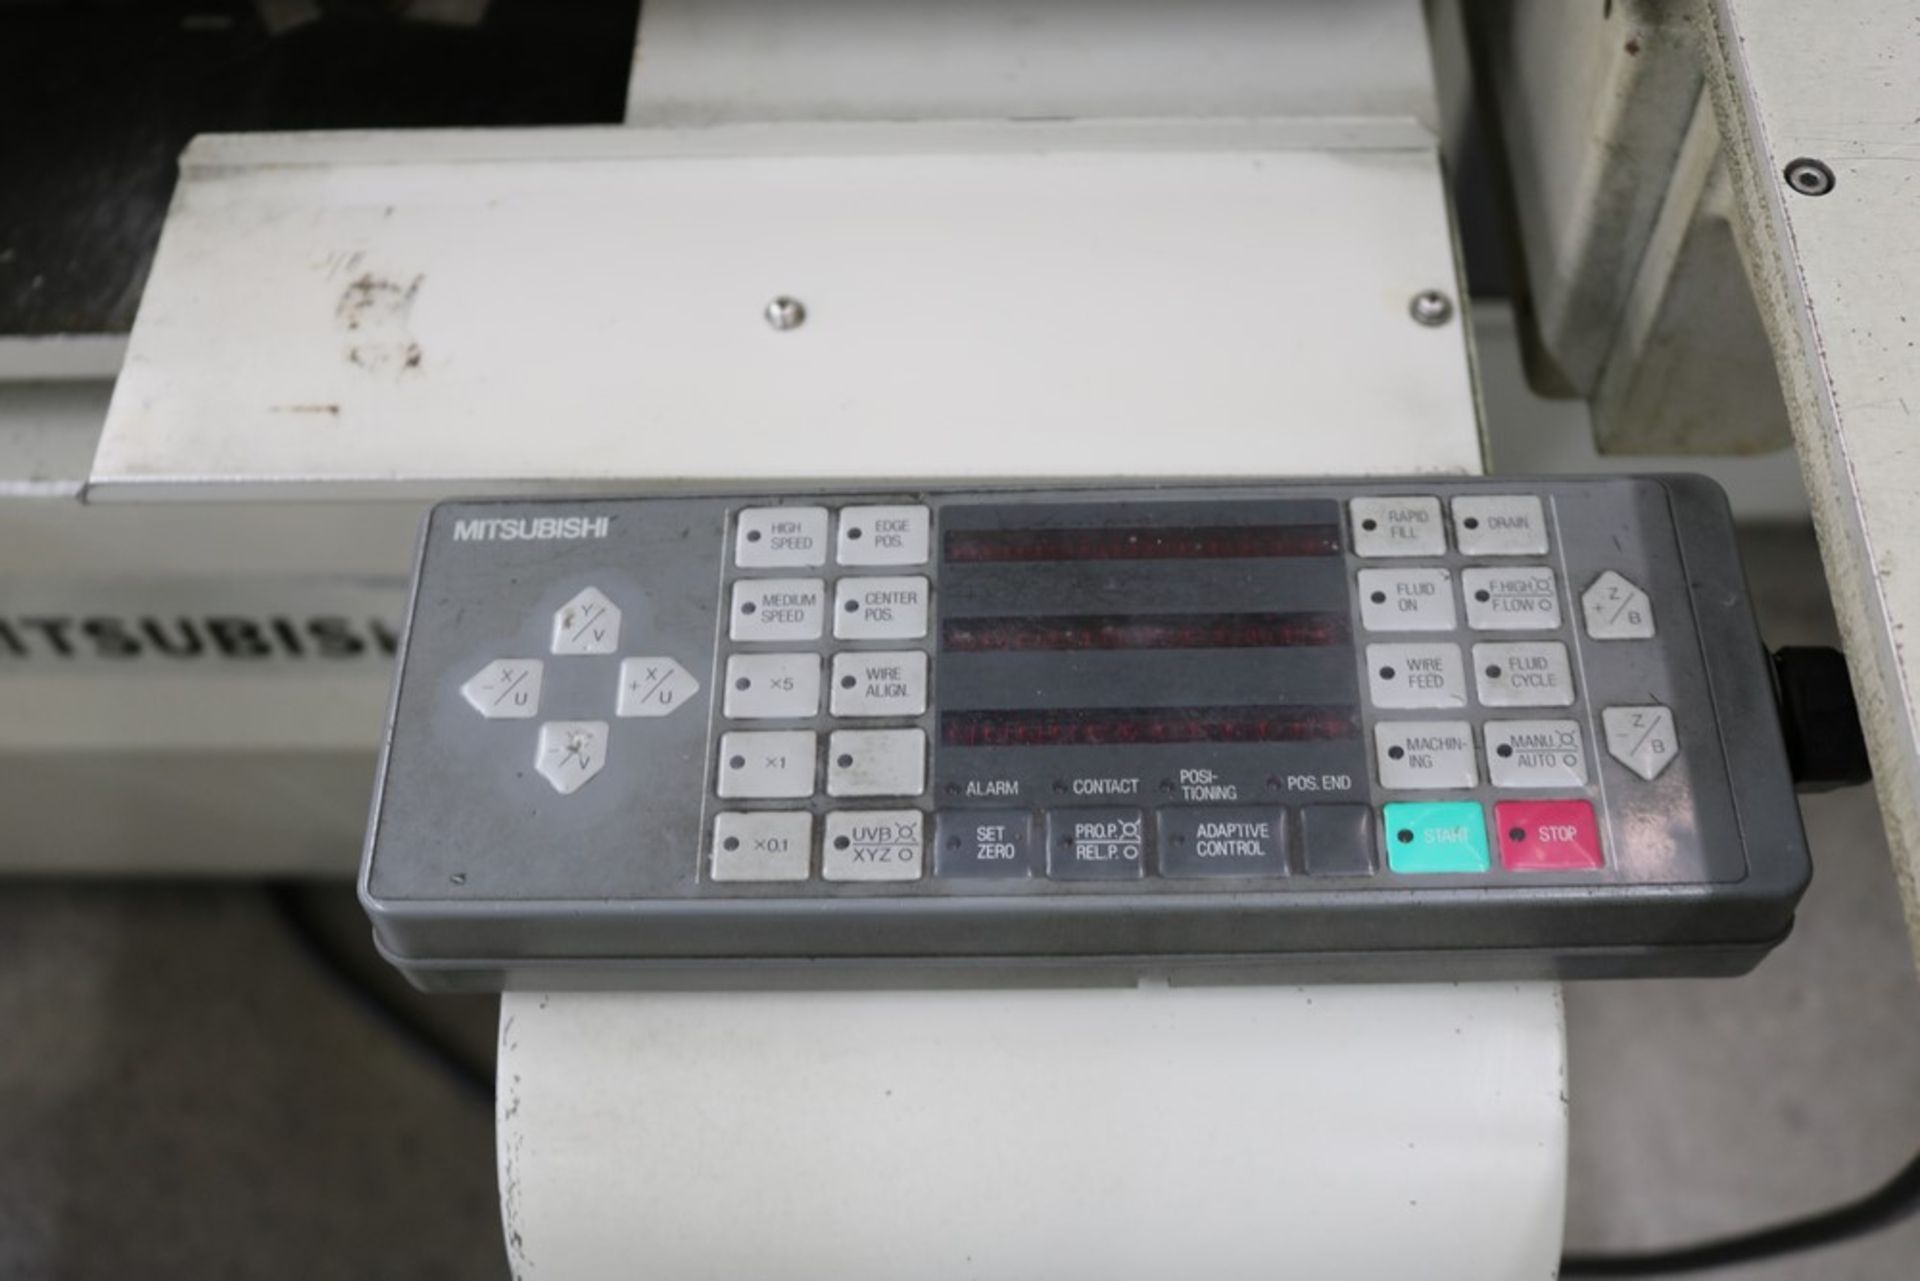 1993 Mitsubishi DWC-110HA EDM Sinker with all Available Accessories, Remote Jog, Auto Thread - Image 11 of 19